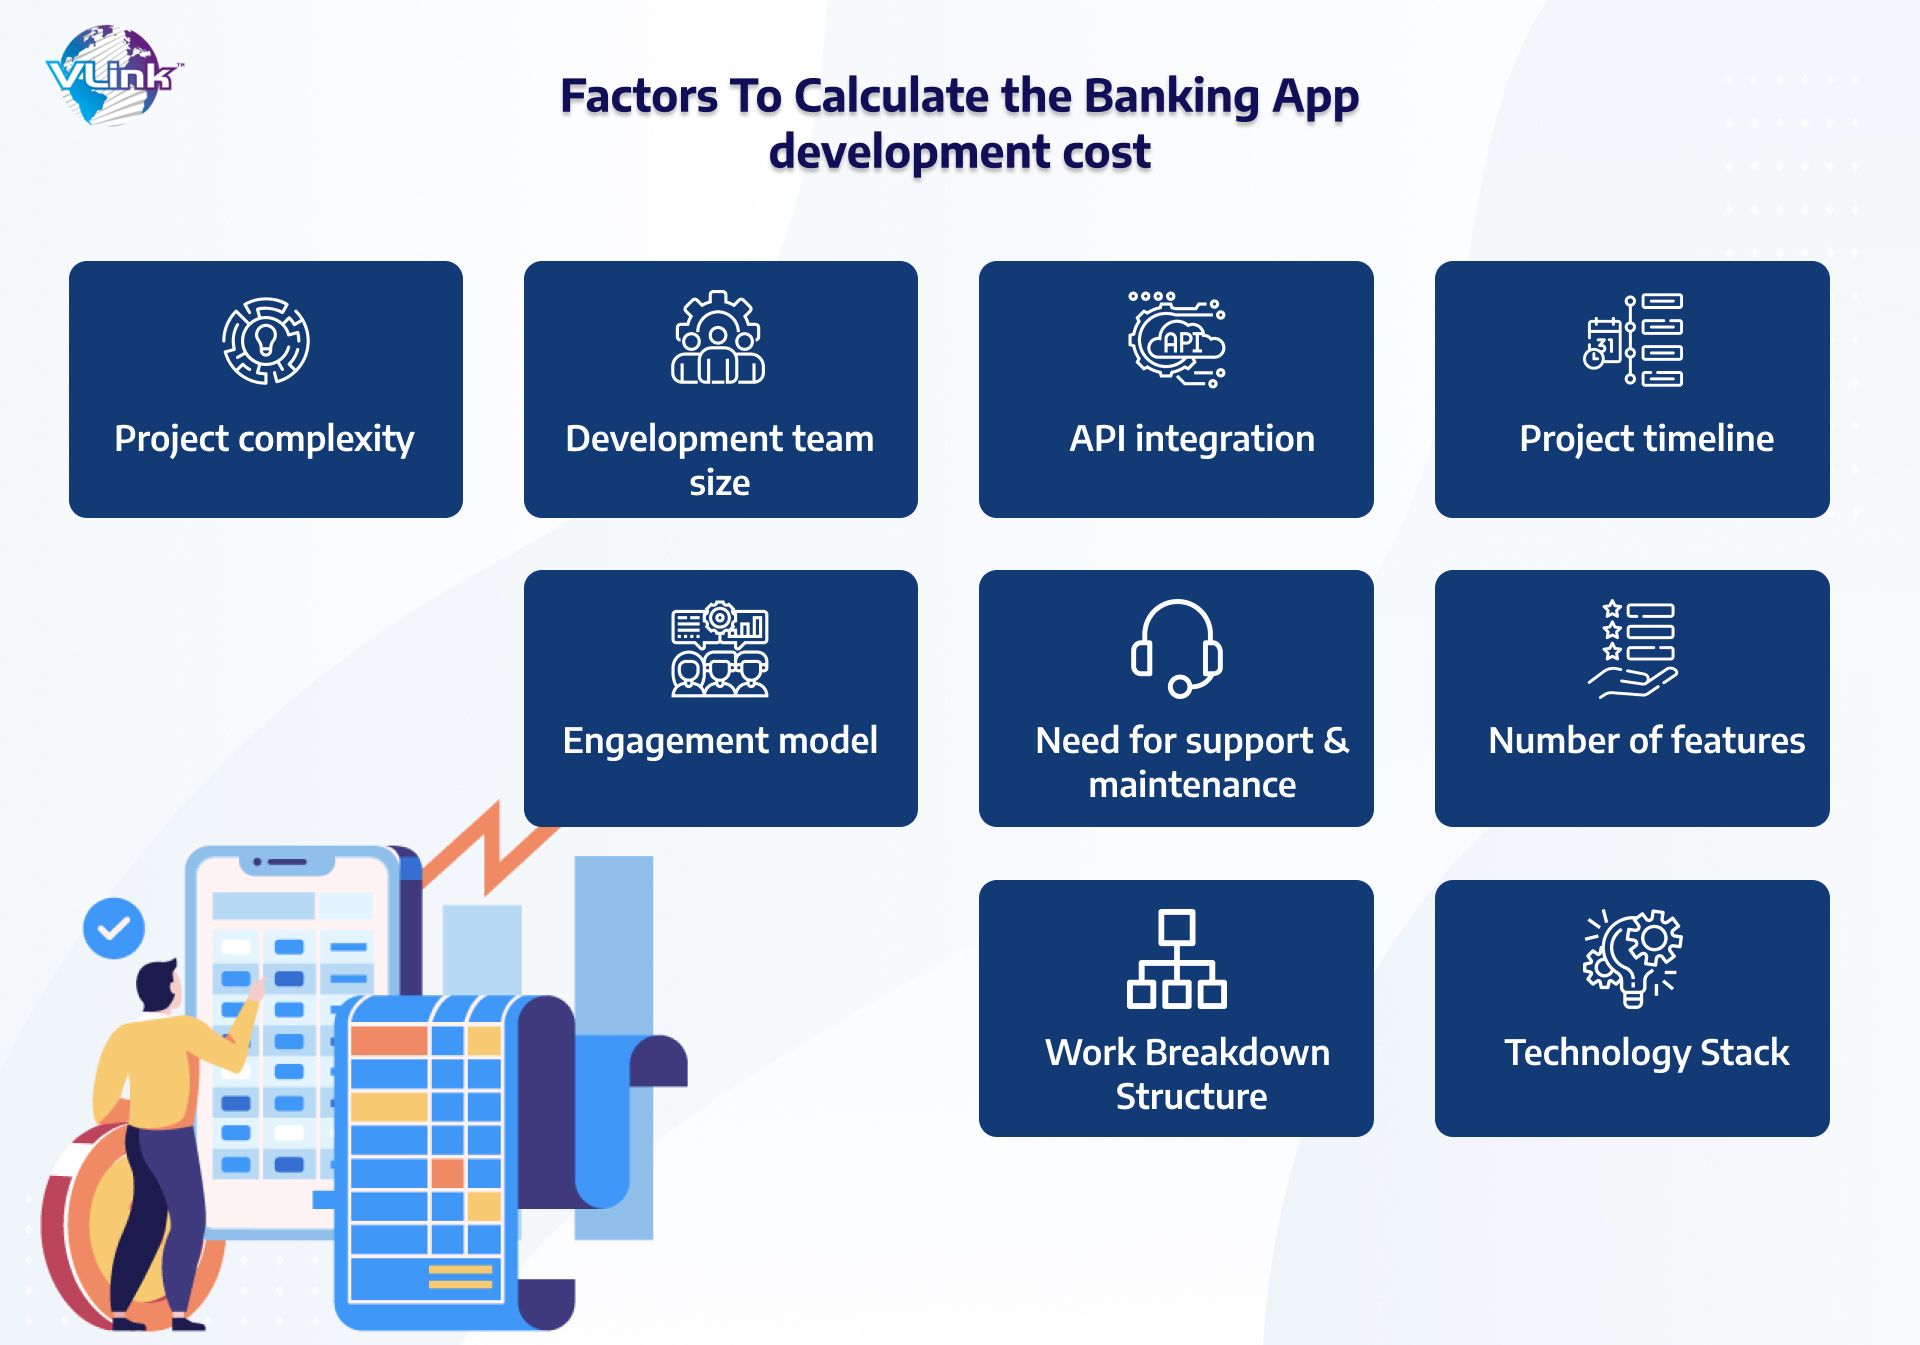 Feature to calculate the banking app development cost